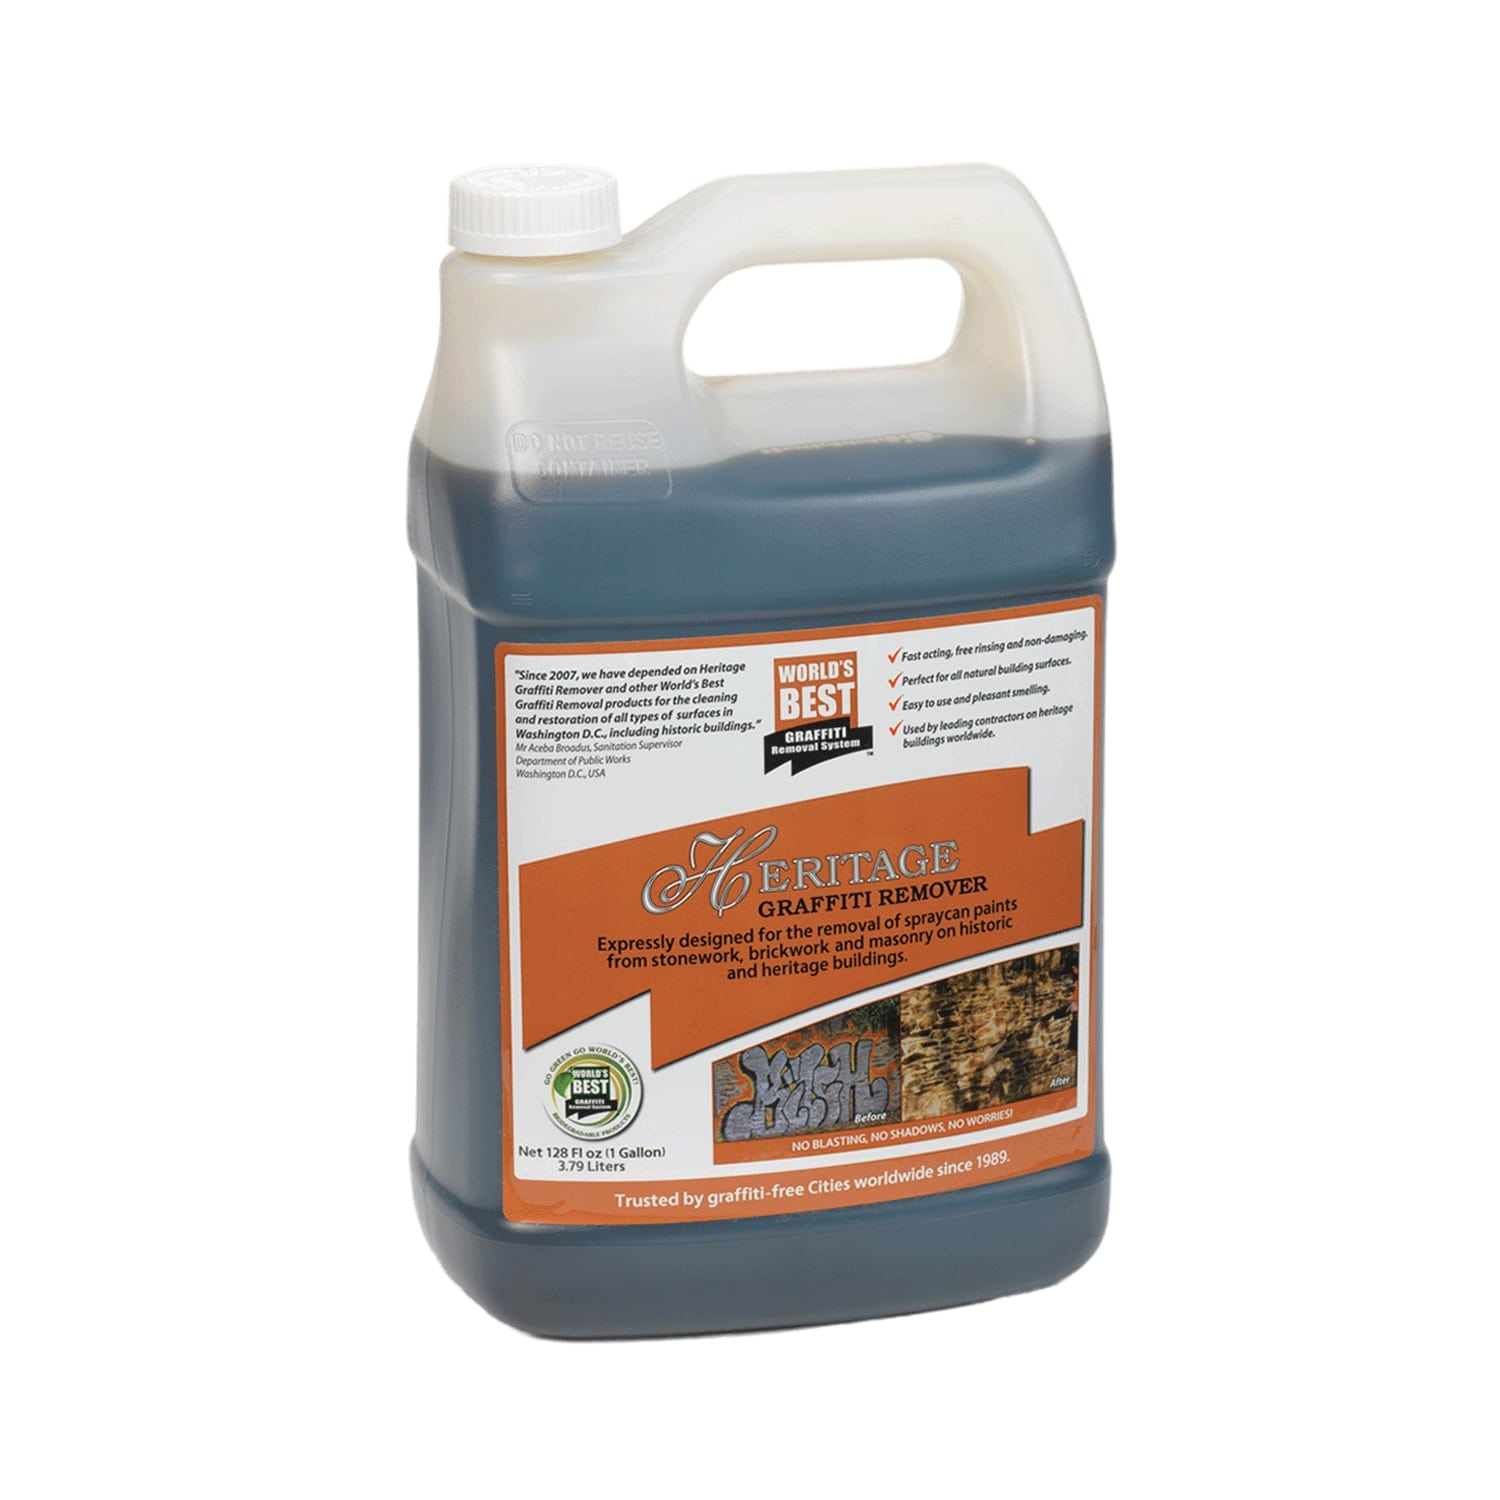 World's Best Graffiti Removal System - Heritage Graffiti Remover - (1  Gallon) Heritage Graffiti Remover is specifically designed for sensitive,  historic and important buildings, to remove graffiti from stonework,  brickwork, and masonry